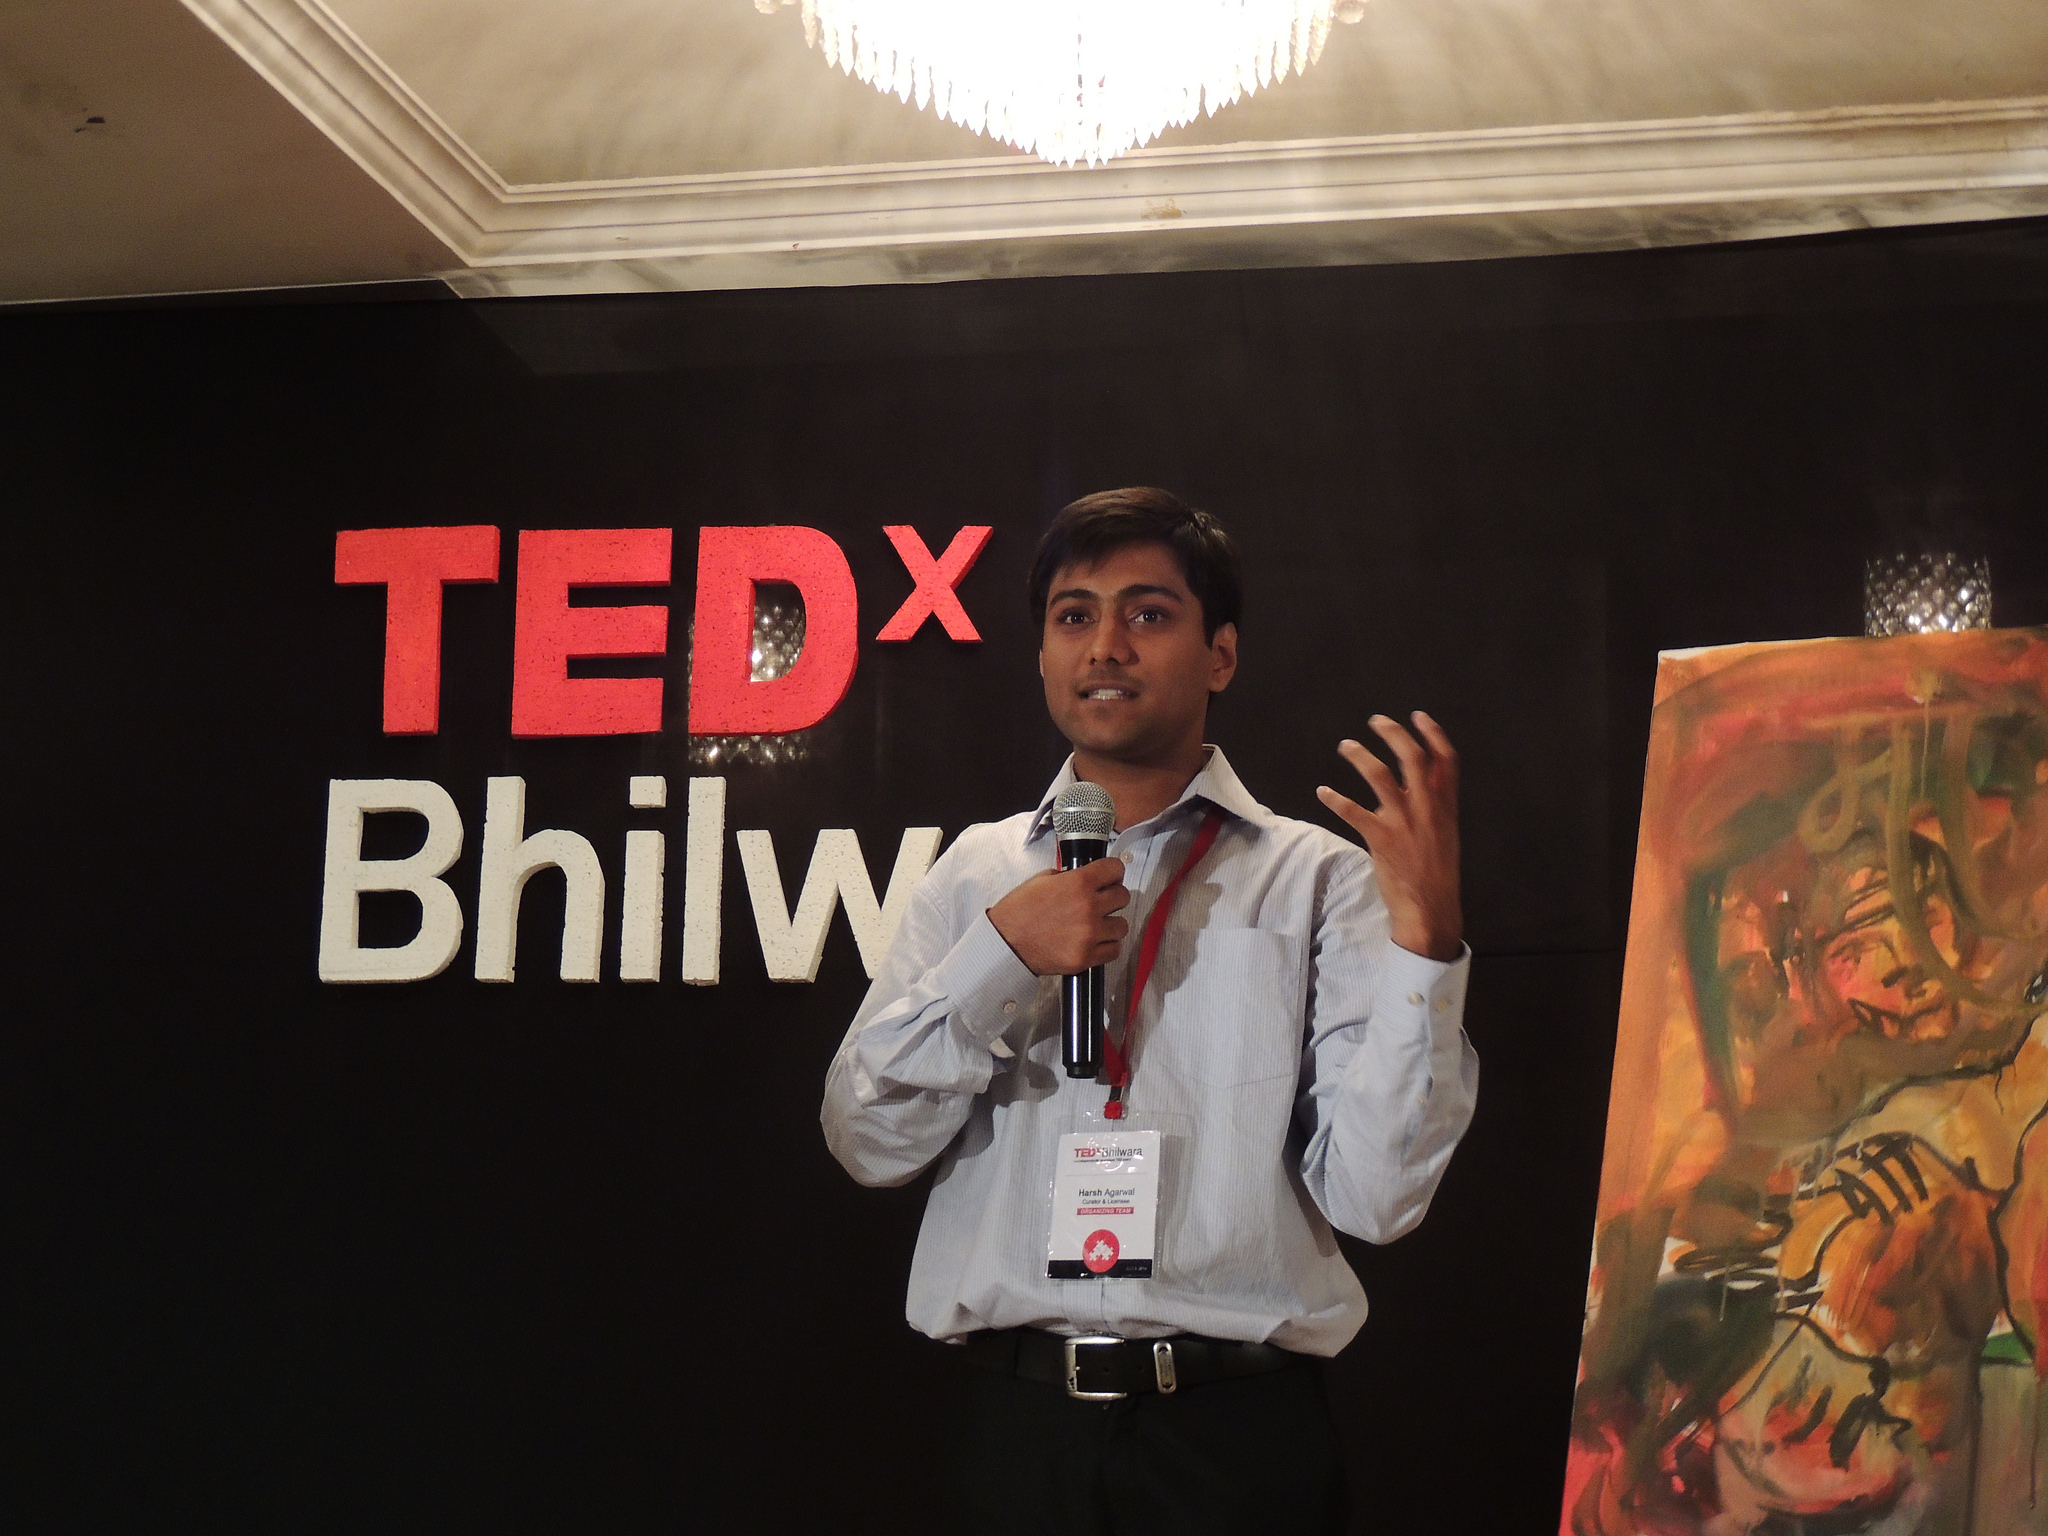 Harsh Agrwal is the organizer of TEDxBhilwara, which he hopes proves that his city is more than a textile hub. Photo: Daksh Baheti